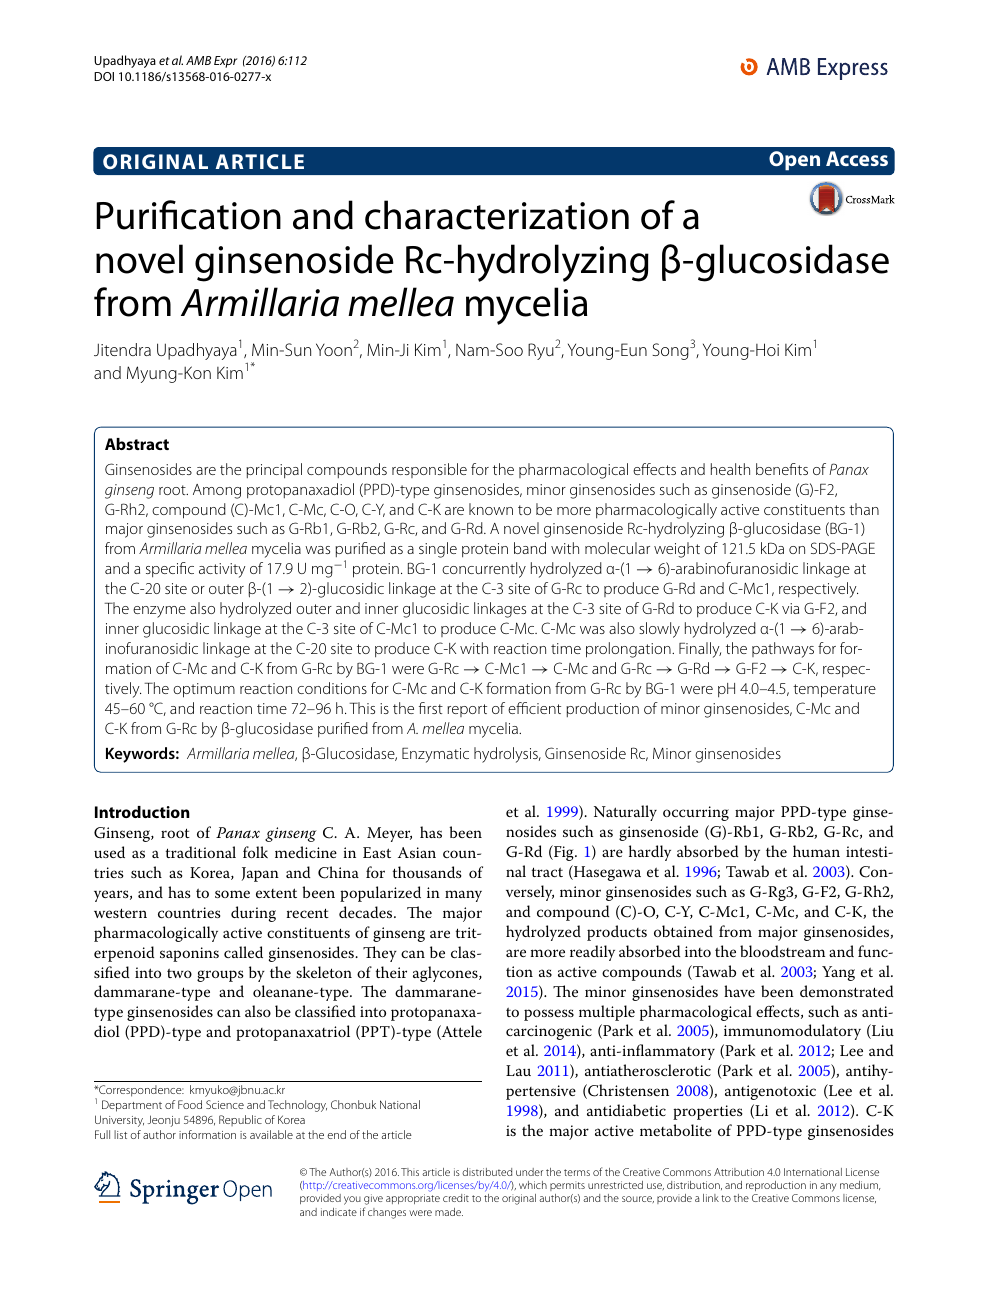 Purification And Characterization Of A Novel Ginsenoside Rc Hydrolyzing B Glucosidase From Armillaria Mellea Mycelia Topic Of Research Paper In Biological Sciences Download Scholarly Article Pdf And Read For Free On Cyberleninka Open